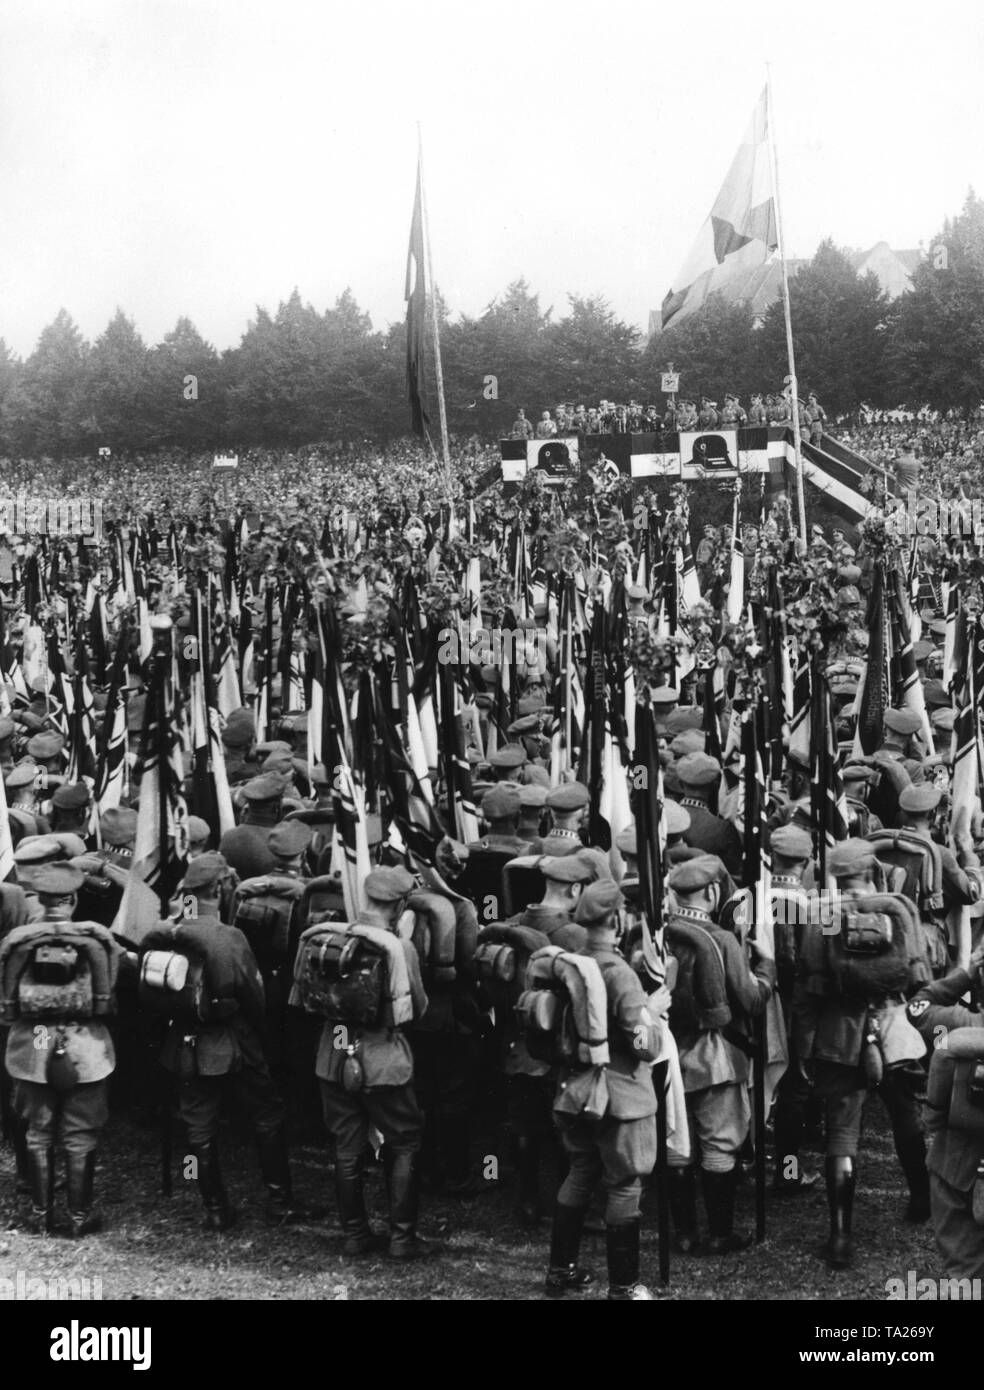 View of the rally of the Stahlhelm at the Maschsee in Hanover during the speech of the Stabchef (Chief of Staff) of the SA, Ernst Roehm. Stock Photo